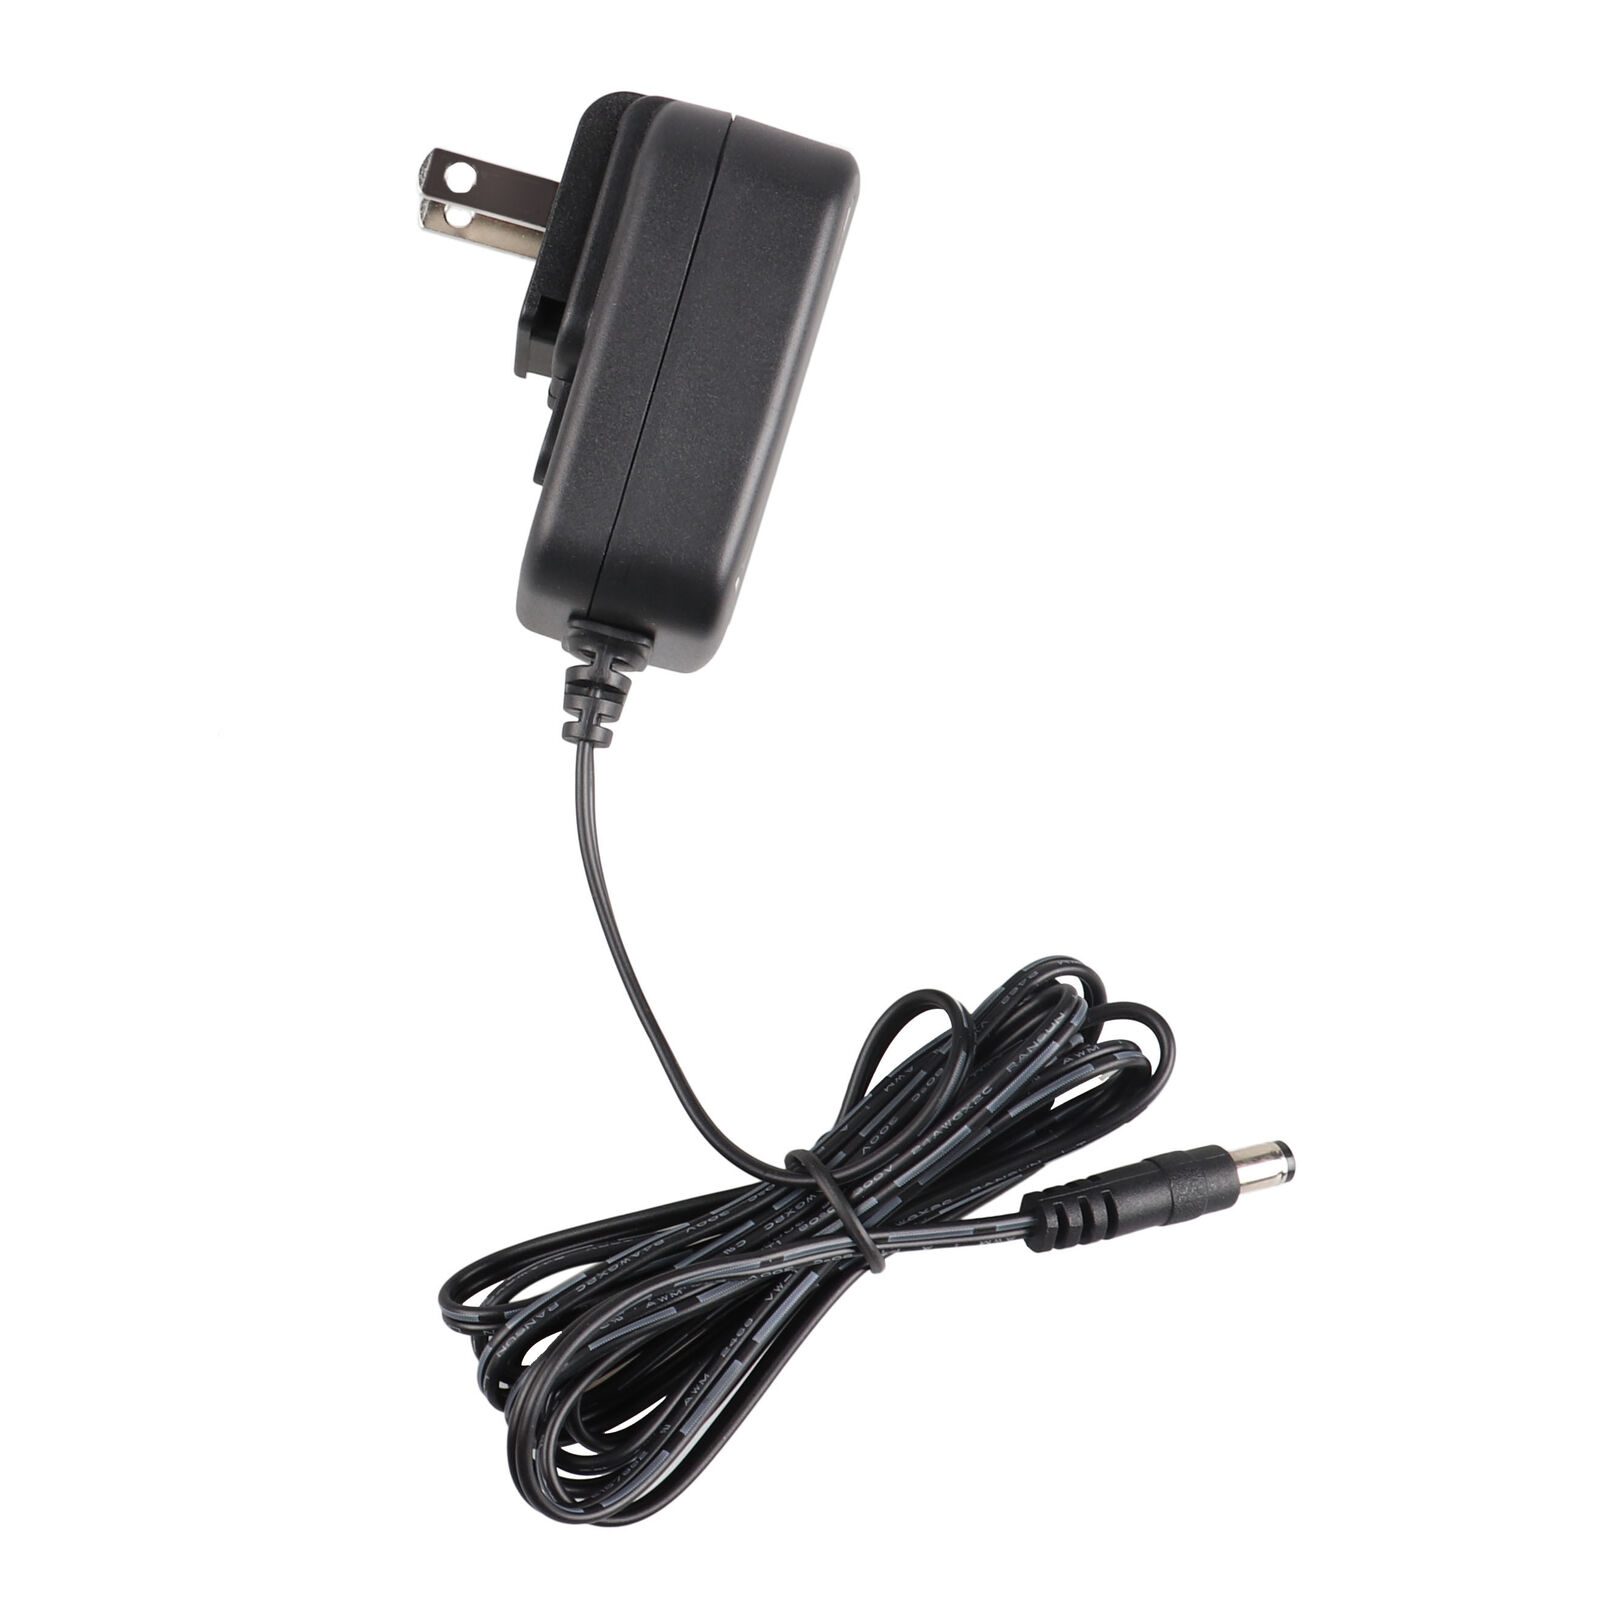 10" VIMICRO VC882 GOOGLE ANDROID 4.0 TABLET PC Power 5v Charger AC DC ADAPTE It comes complete with power cord so you d